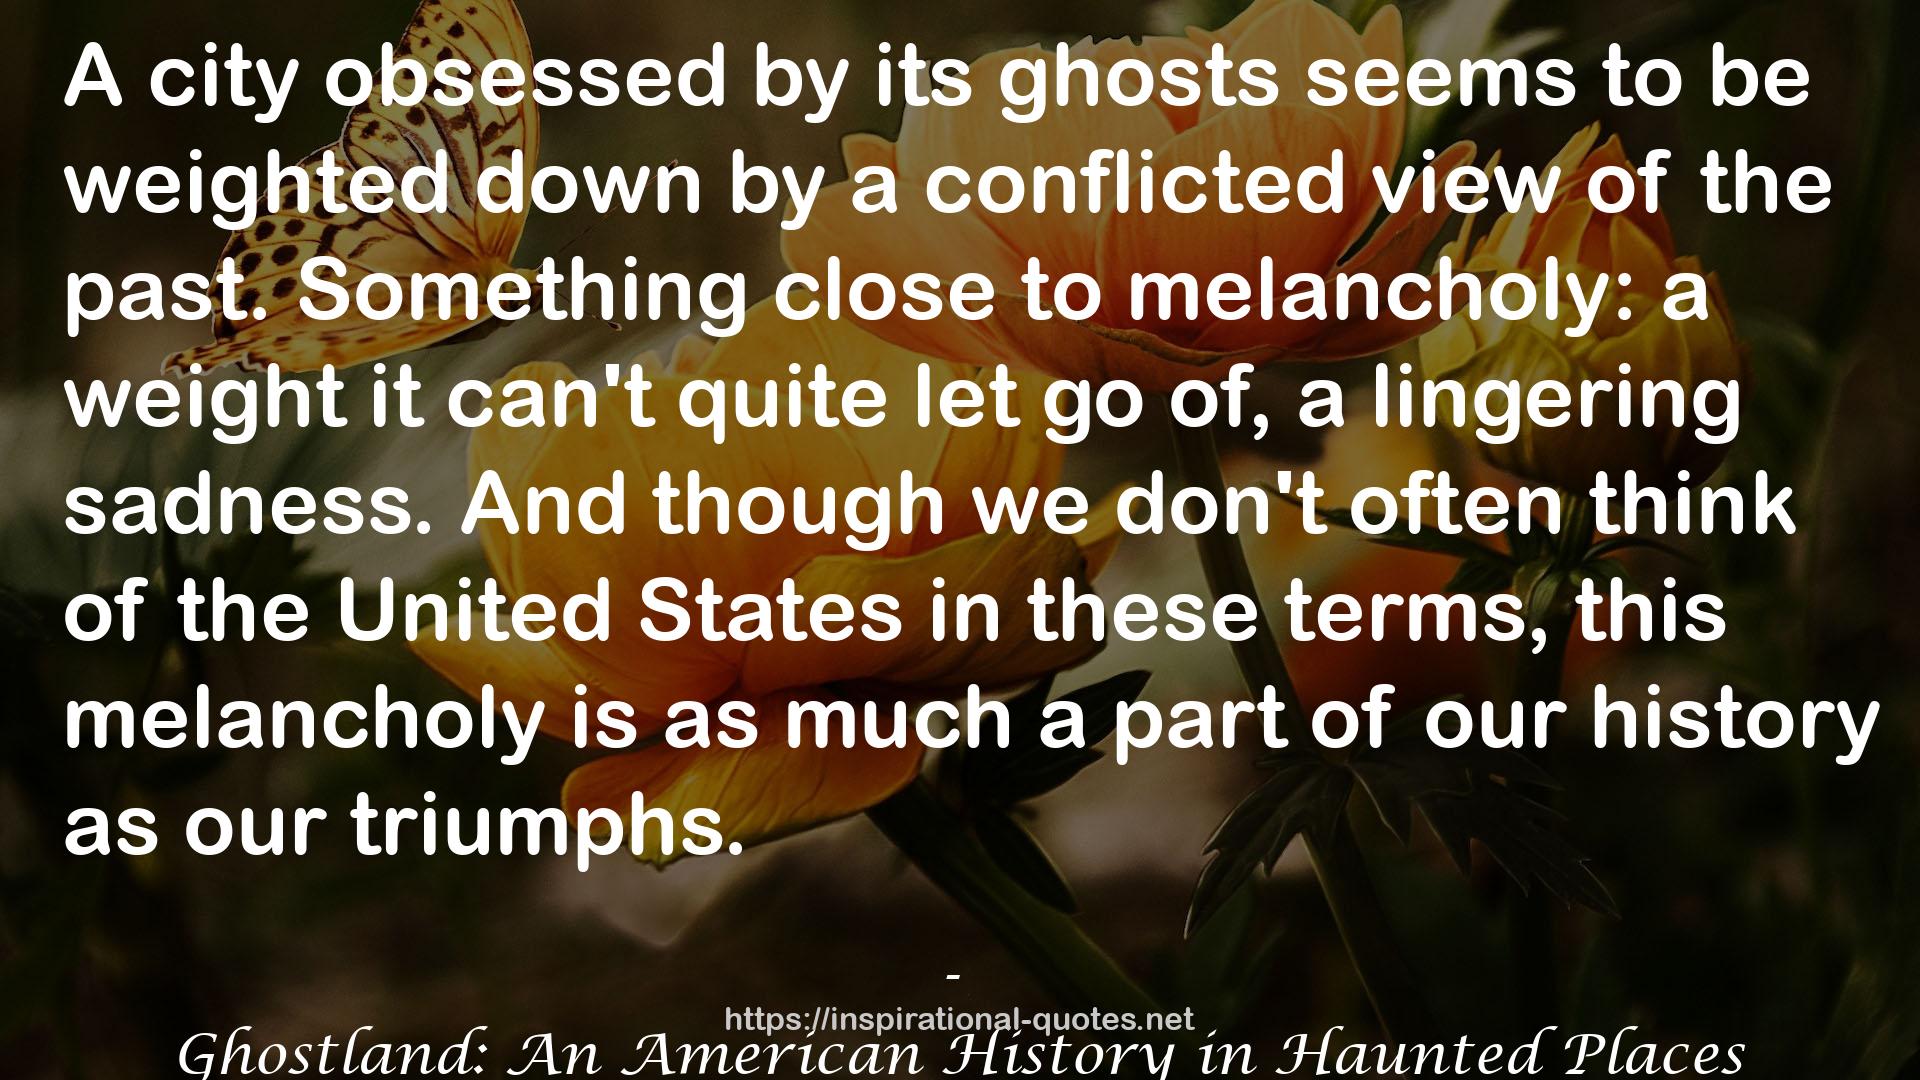 Ghostland: An American History in Haunted Places QUOTES